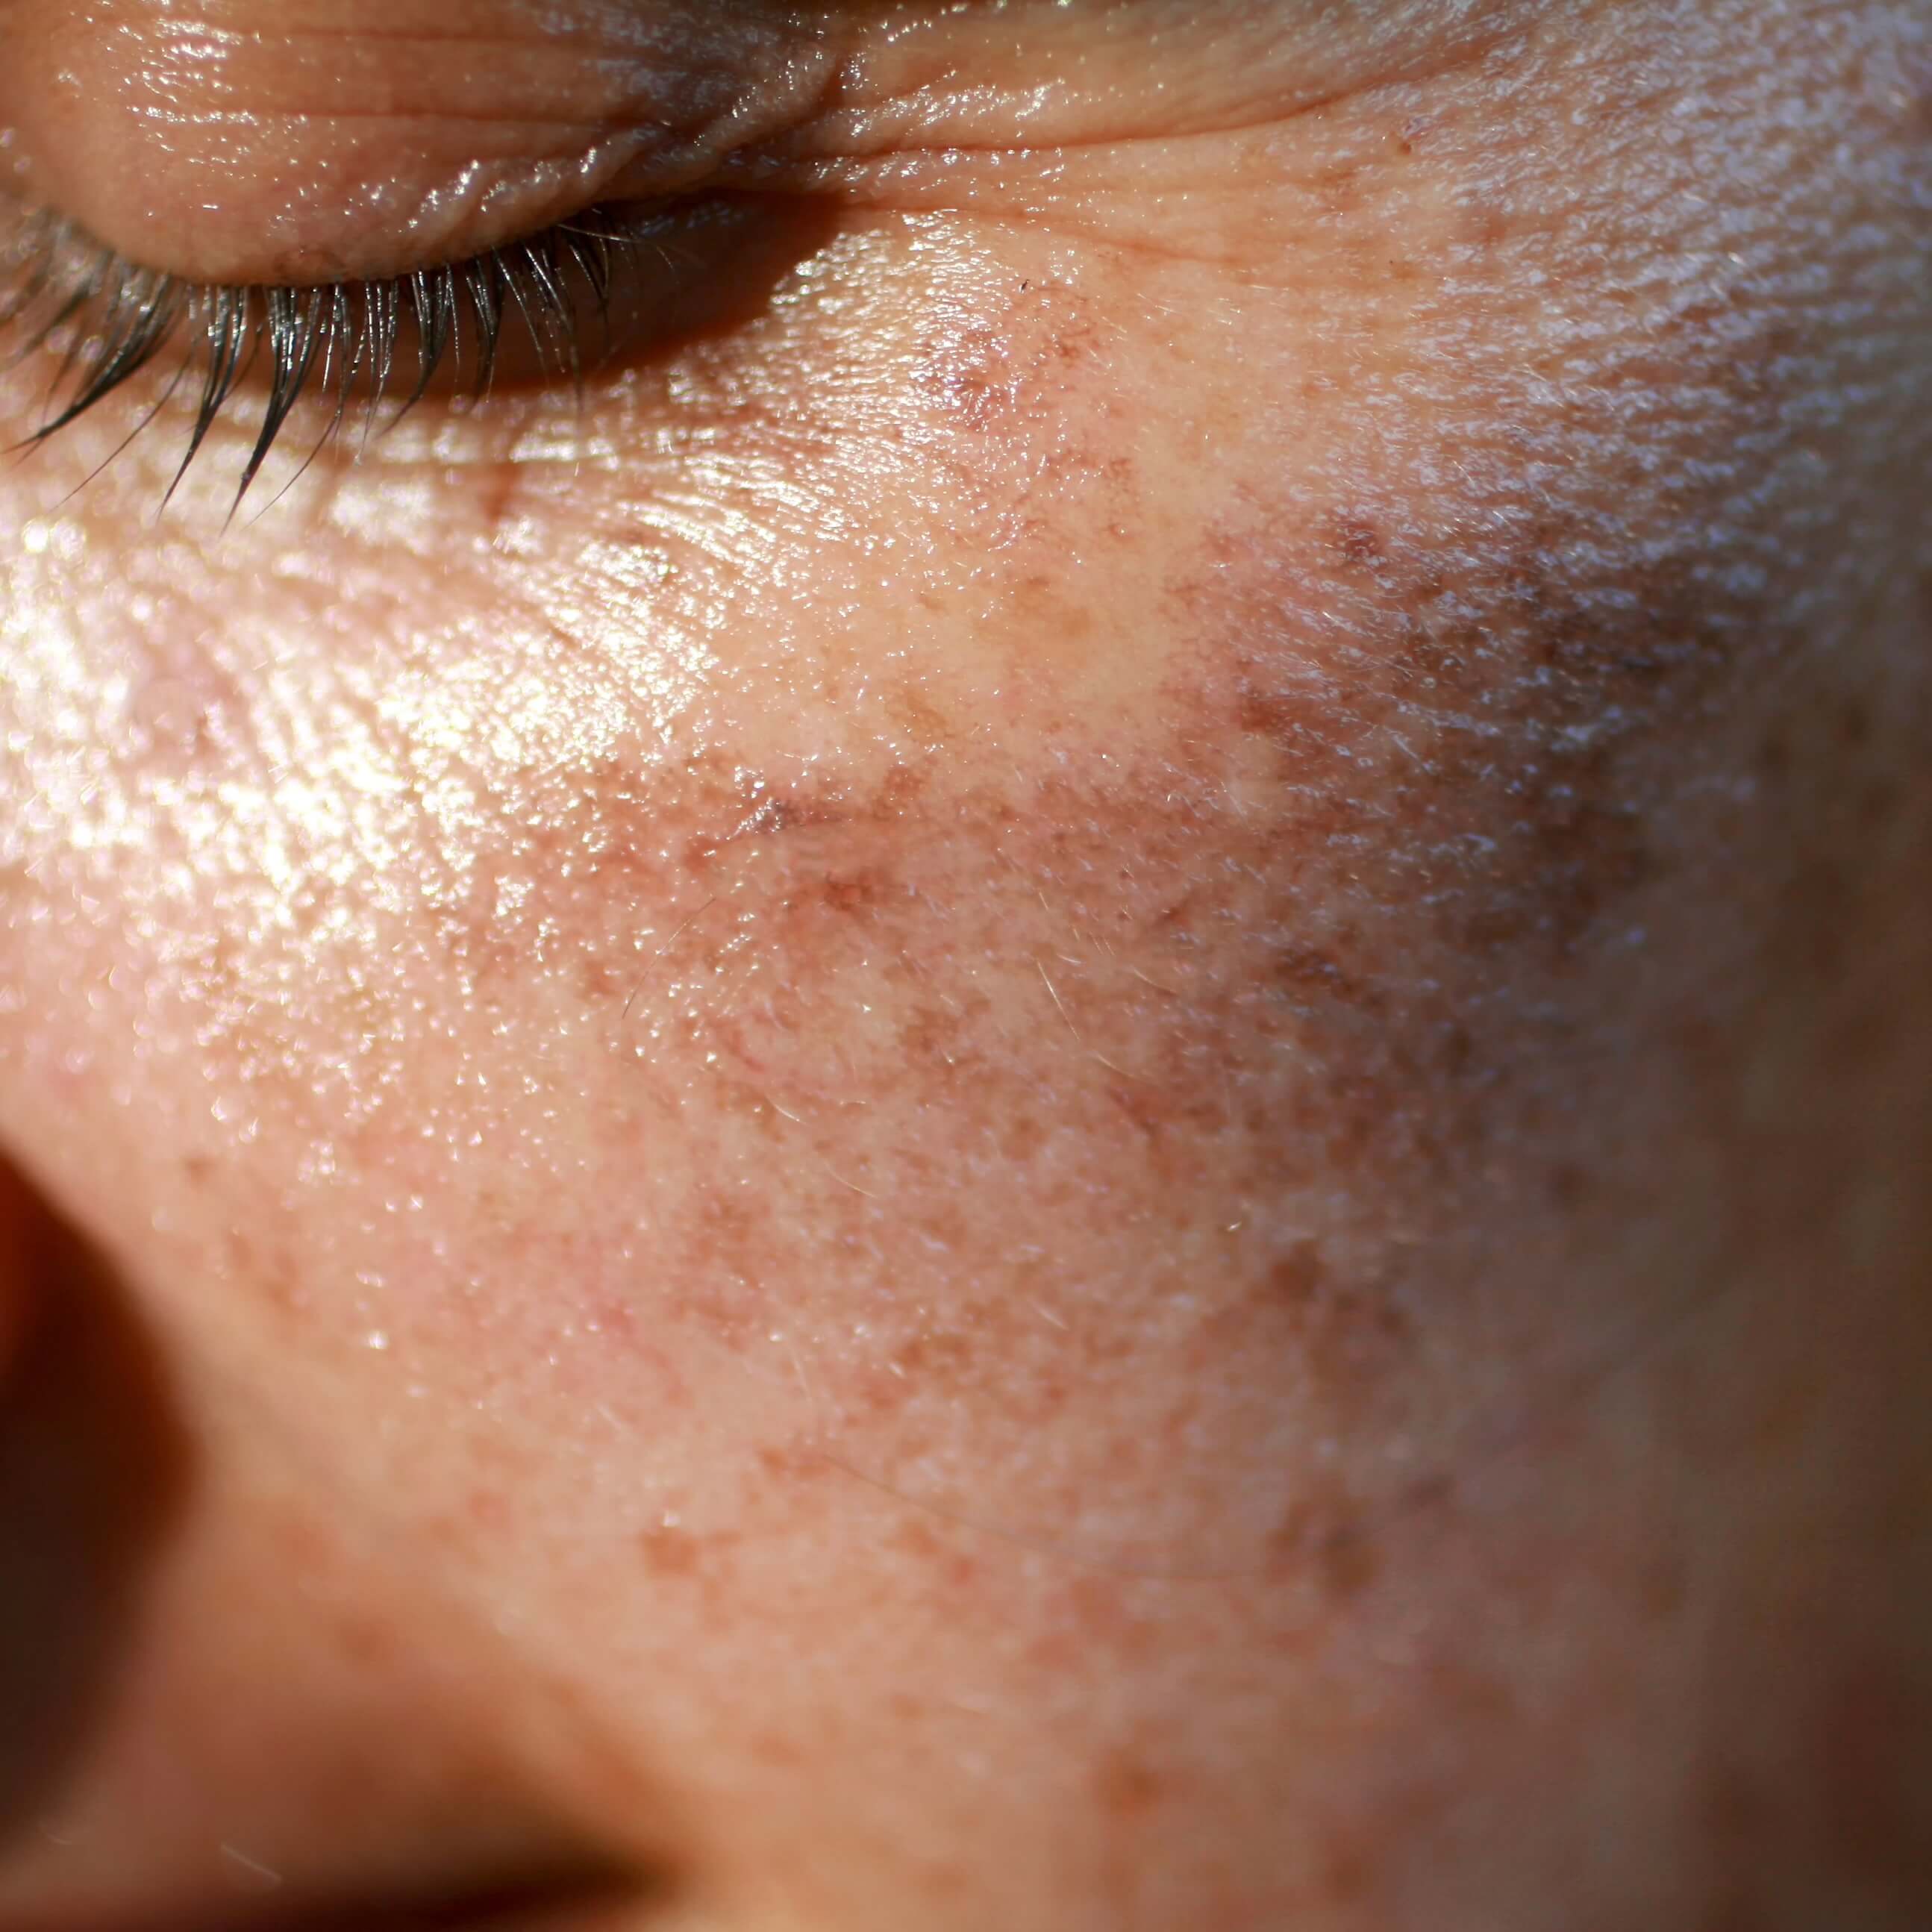 A woman with hyperpigmentation and wrinkles signs of aging